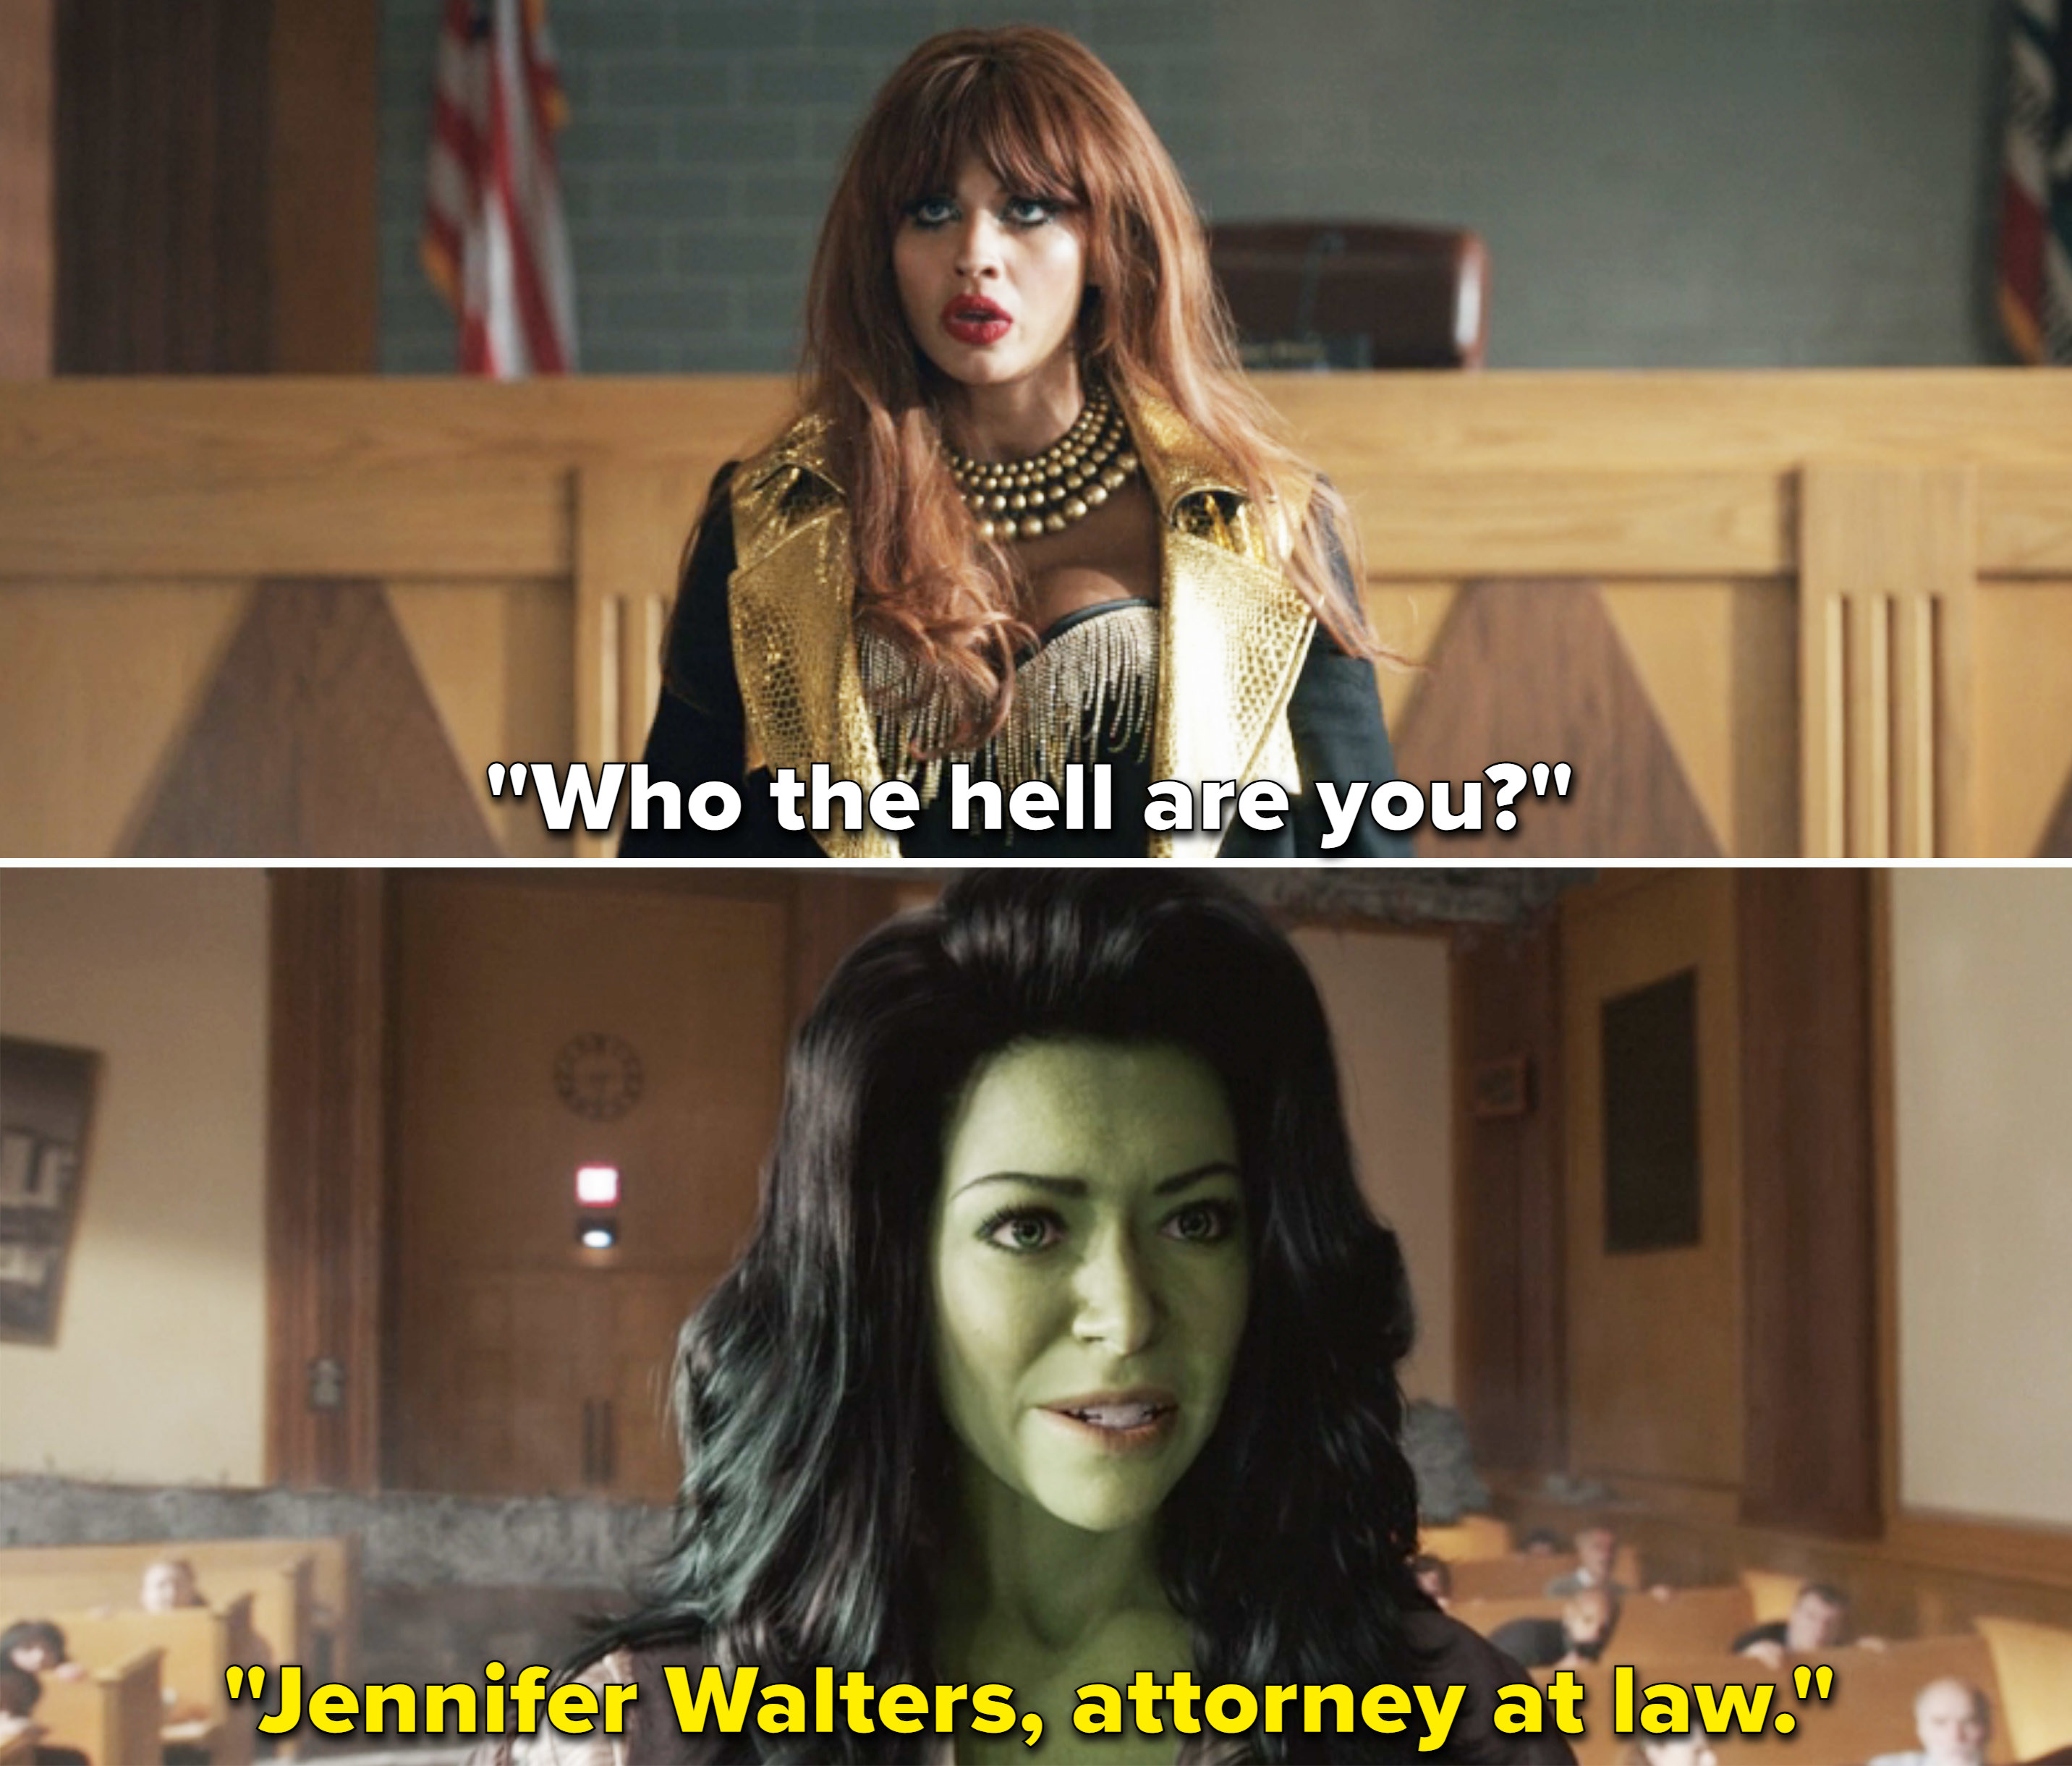 Titania says &quot;Who the hell are you?&quot; to which Jen replies &quot;Jennifer Walters, attorney at law&quot;